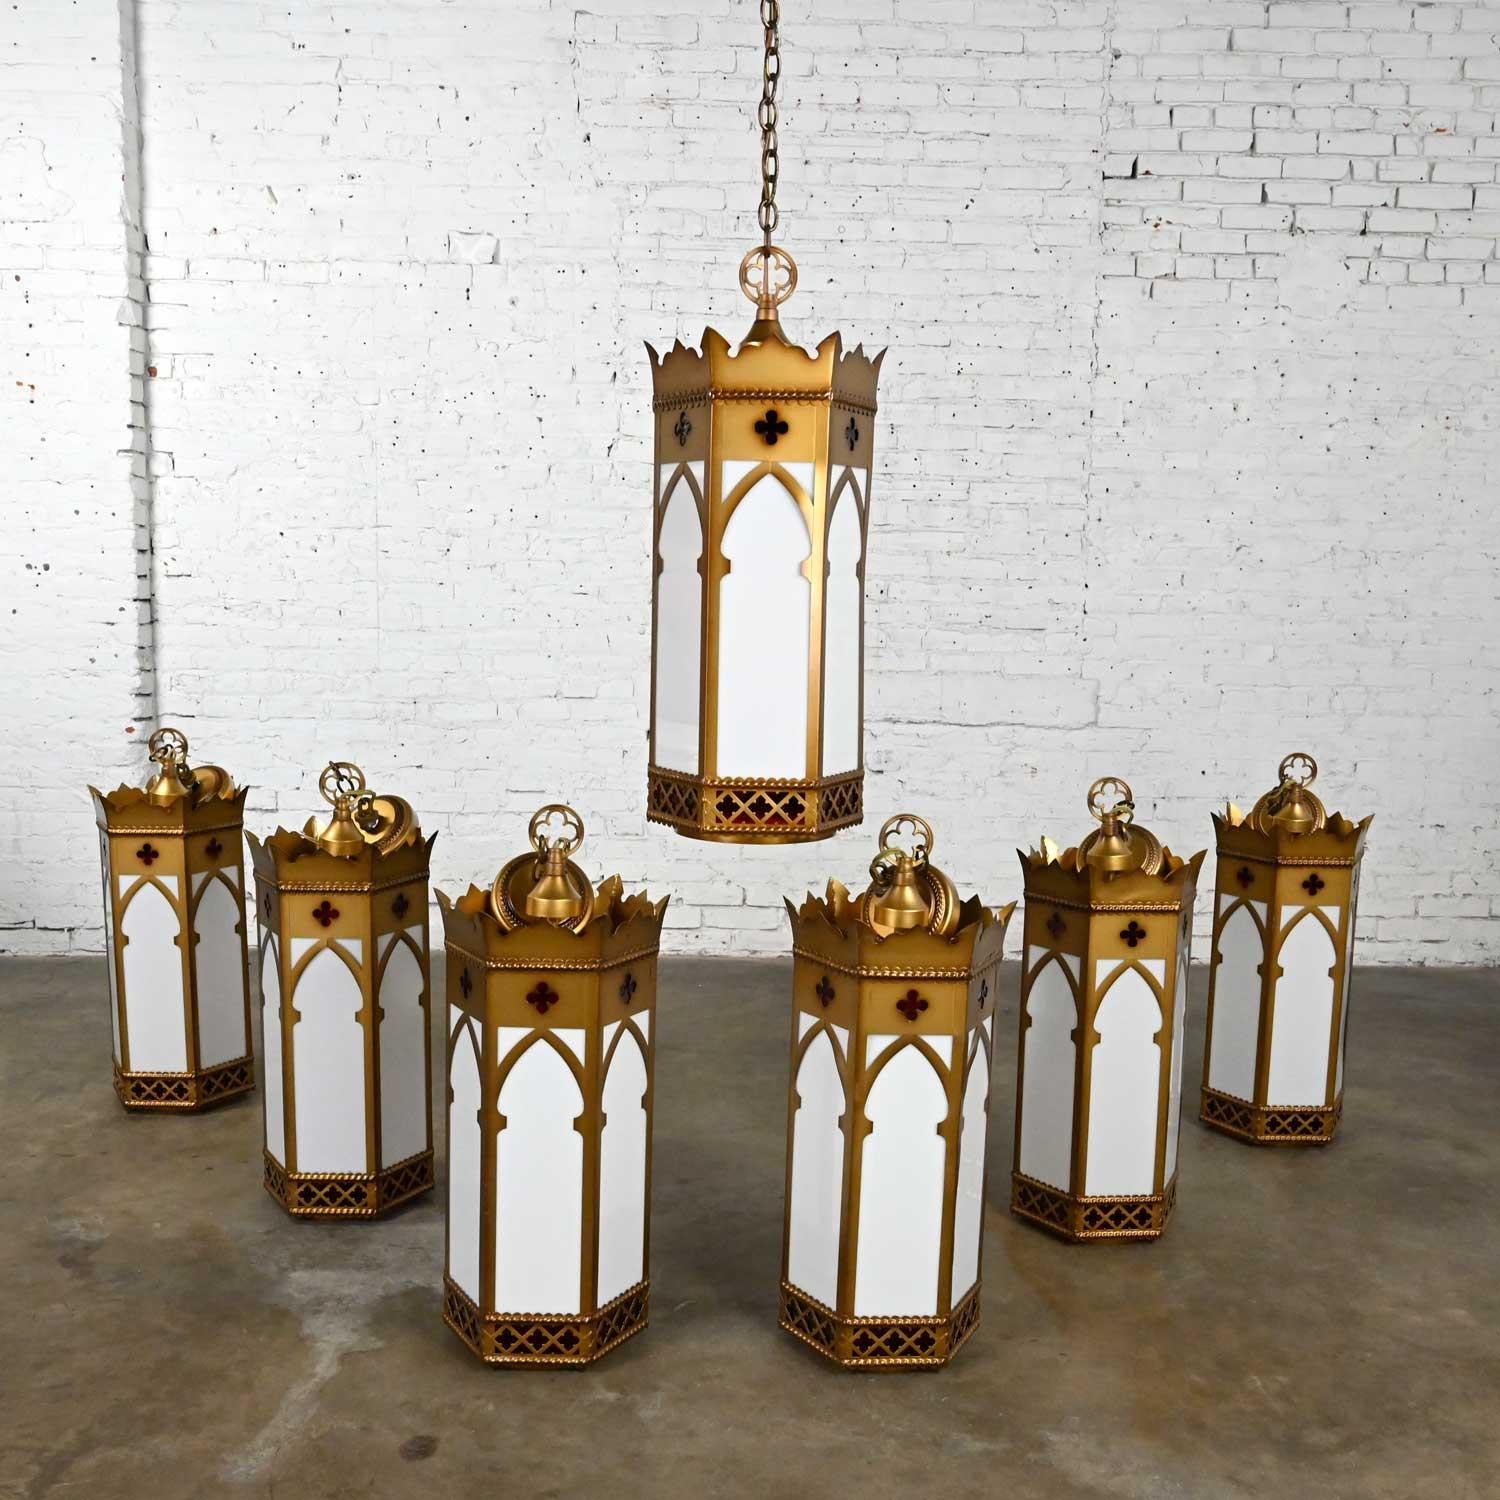 Fabulous vintage Gothic Ecclesiastical gold painted metal & white & red plastic hanging light fixtures, selling separately. Beautiful condition, keeping in mind that these are vintage and not new so will have signs of use and wear. Each fixture has